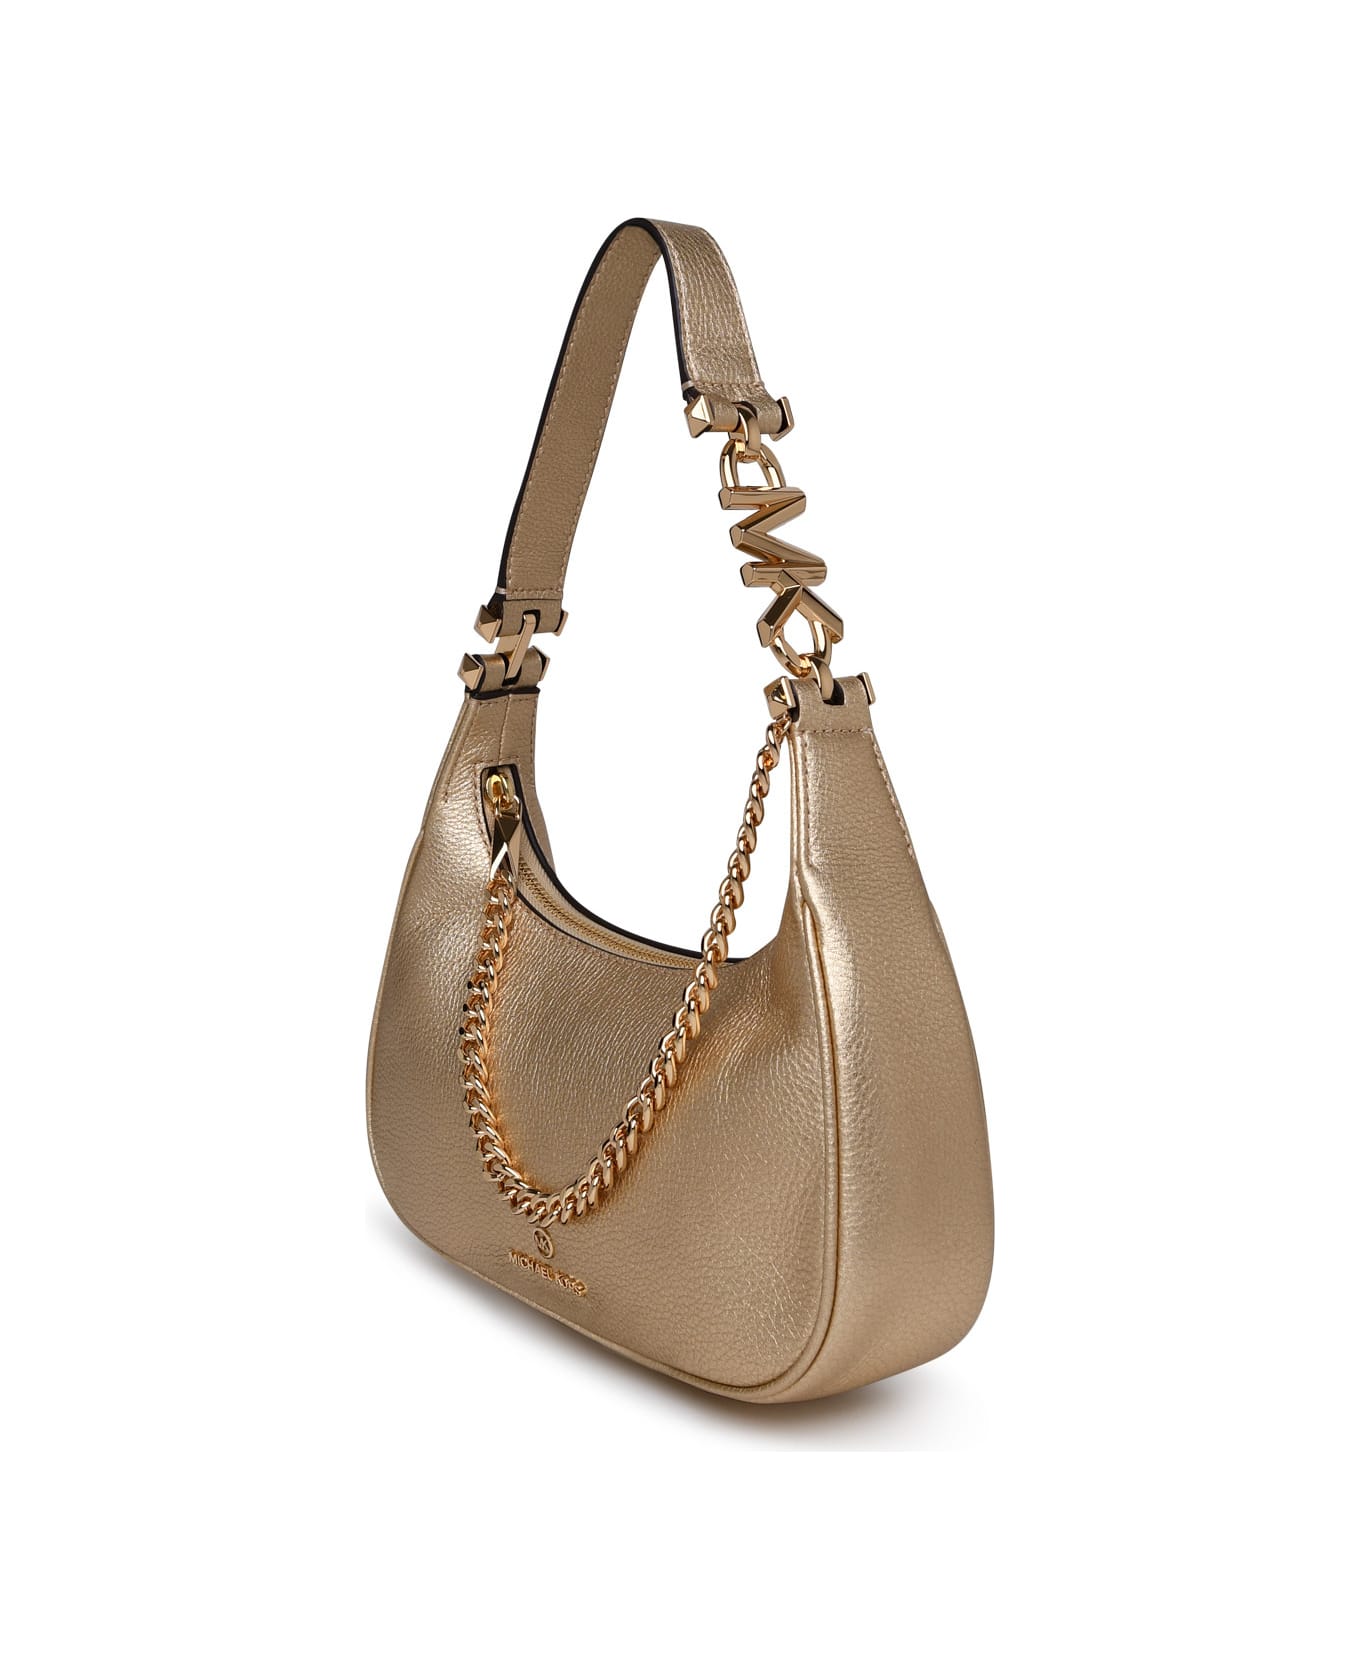 Michael Kors Piper Leather Bag - Gold トートバッグ